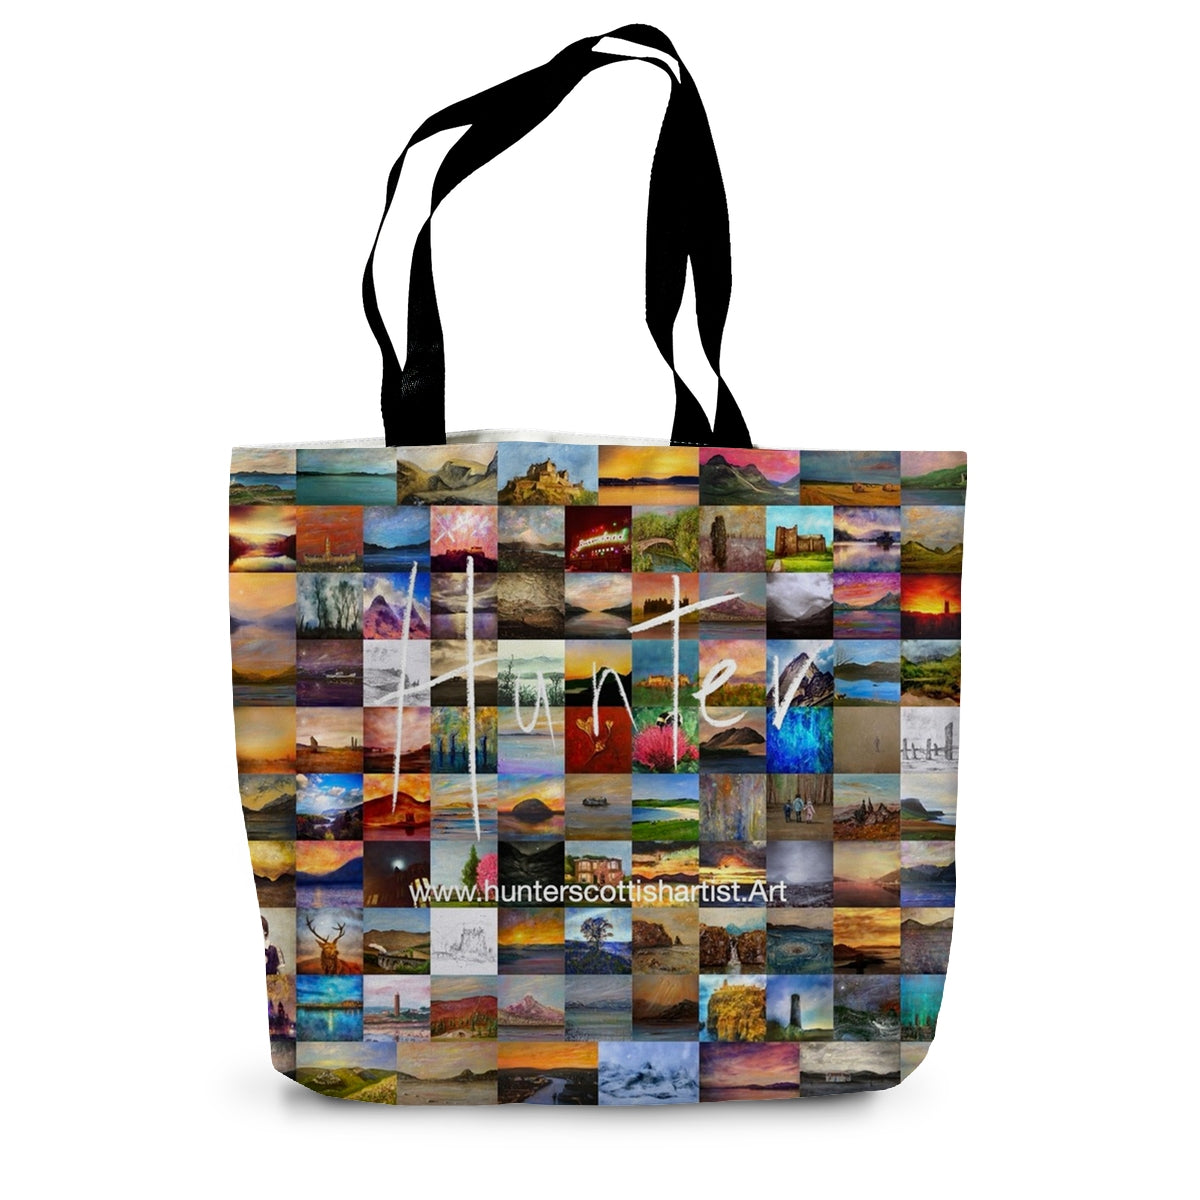 Loch Tay Art Gifts Canvas Tote Bag-Bags-Scottish Lochs & Mountains Art Gallery-14"x18.5"-Paintings, Prints, Homeware, Art Gifts From Scotland By Scottish Artist Kevin Hunter